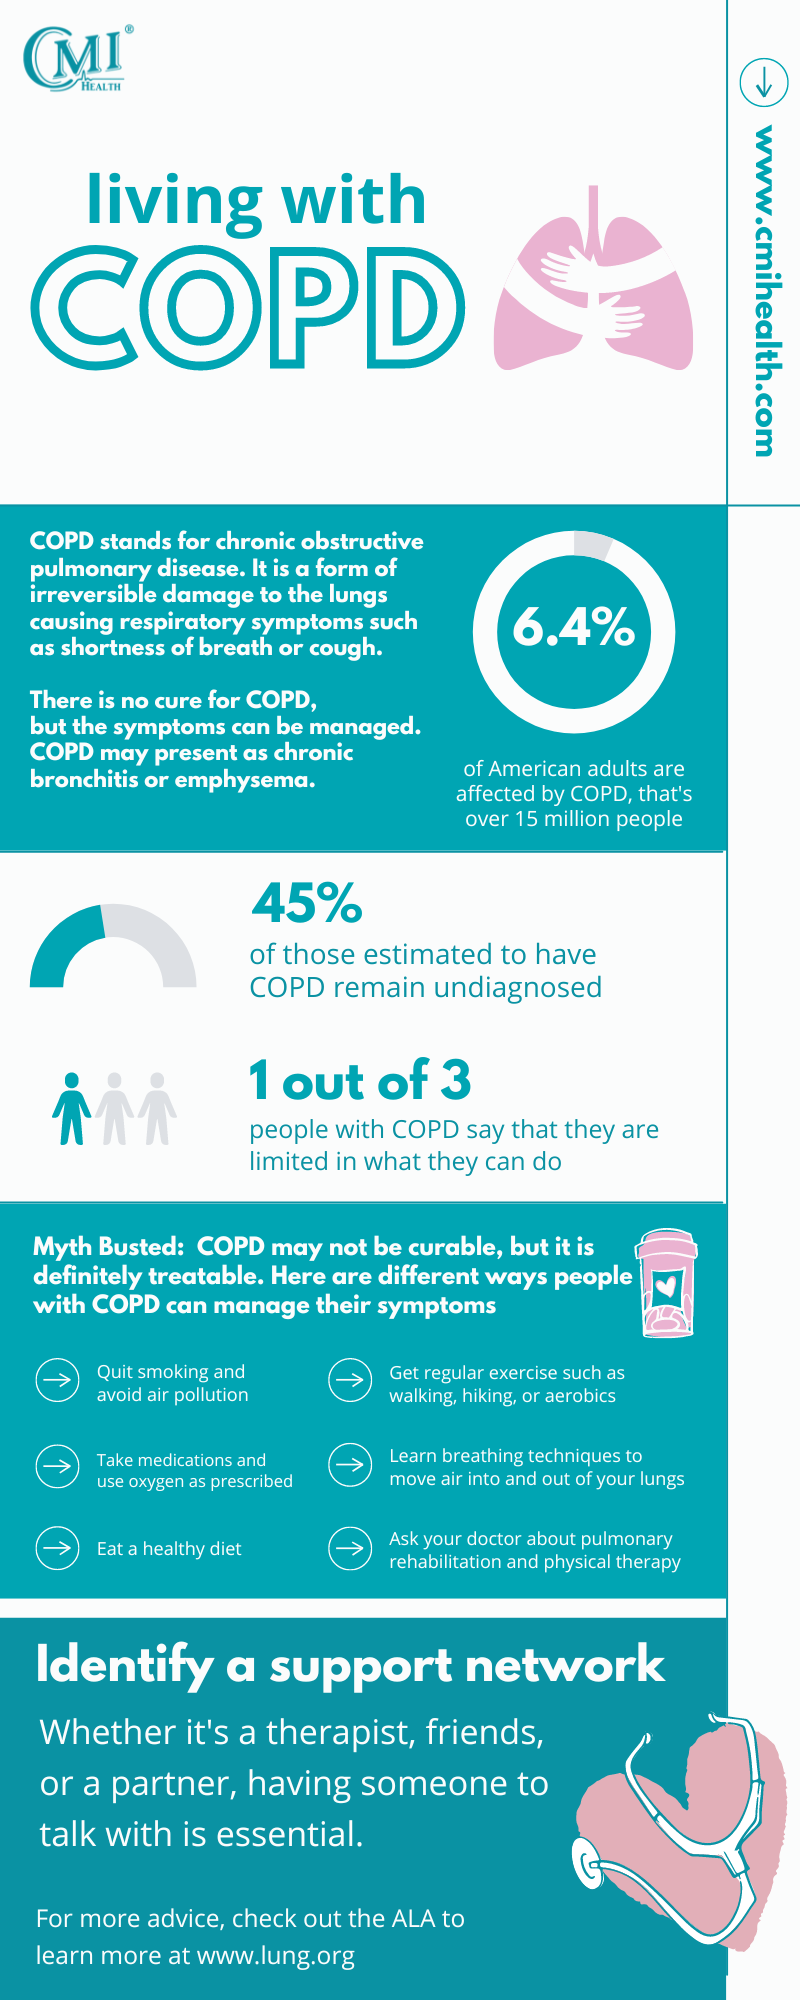 Living With COPD Infographic | CMI Health